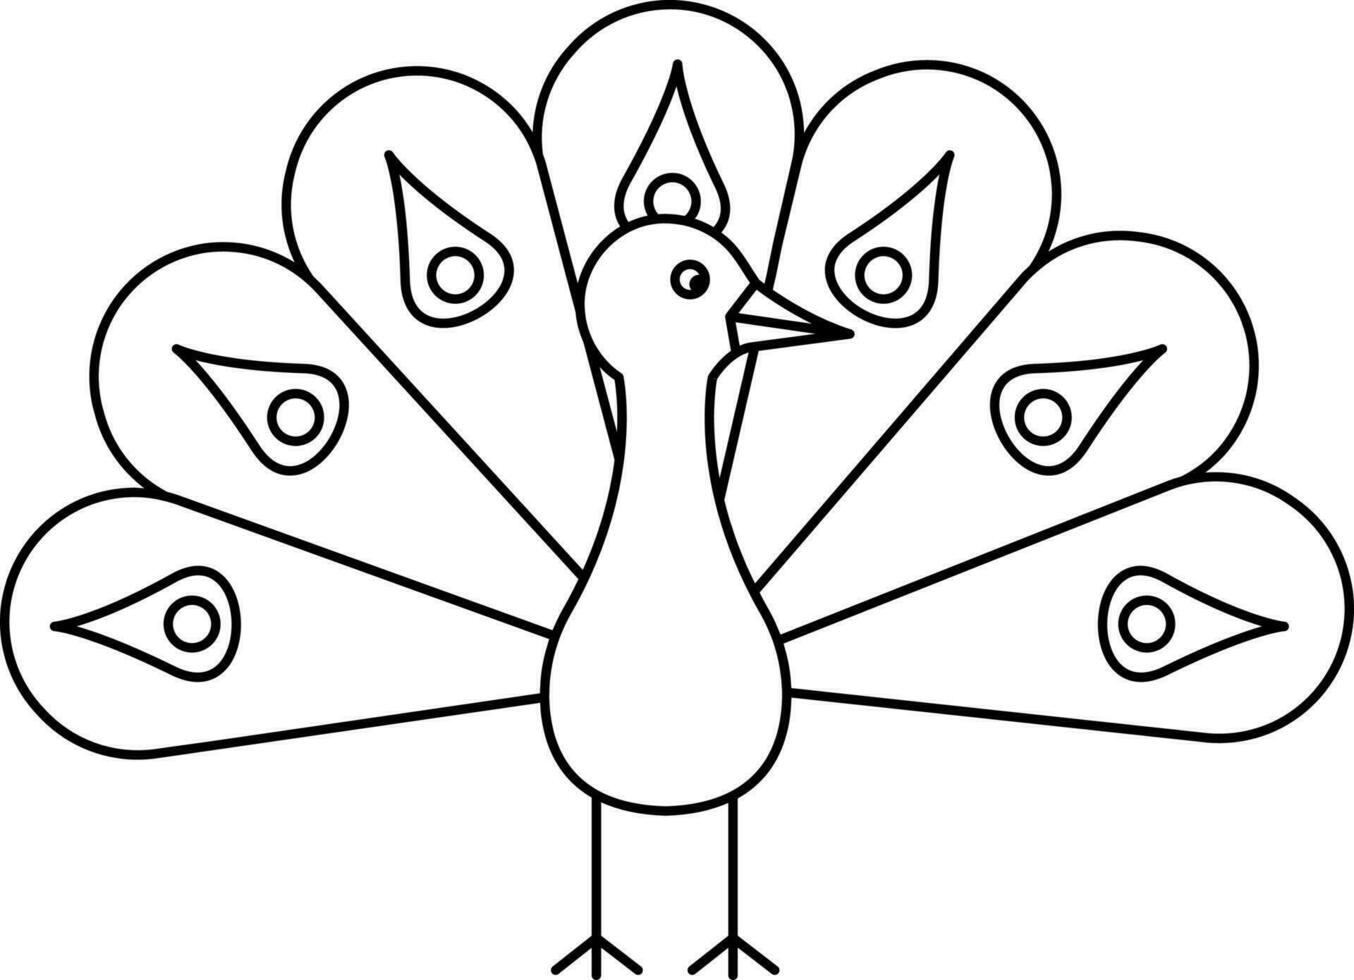 Peacock Cartoon Character Icon In Black Outline. vector